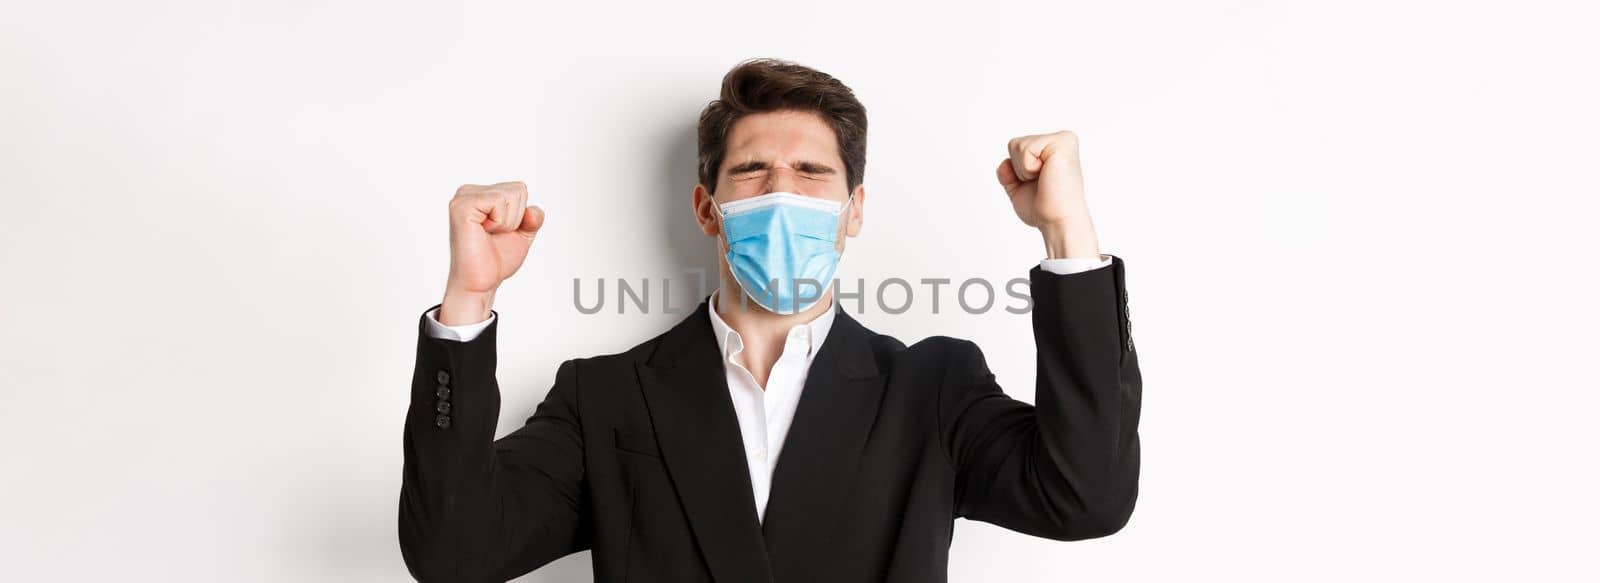 Concept of covid-19, business and social distancing. Close-up of handsome man in suit and medical mask, rejoicing and winning, raising hands up, shouting yes.